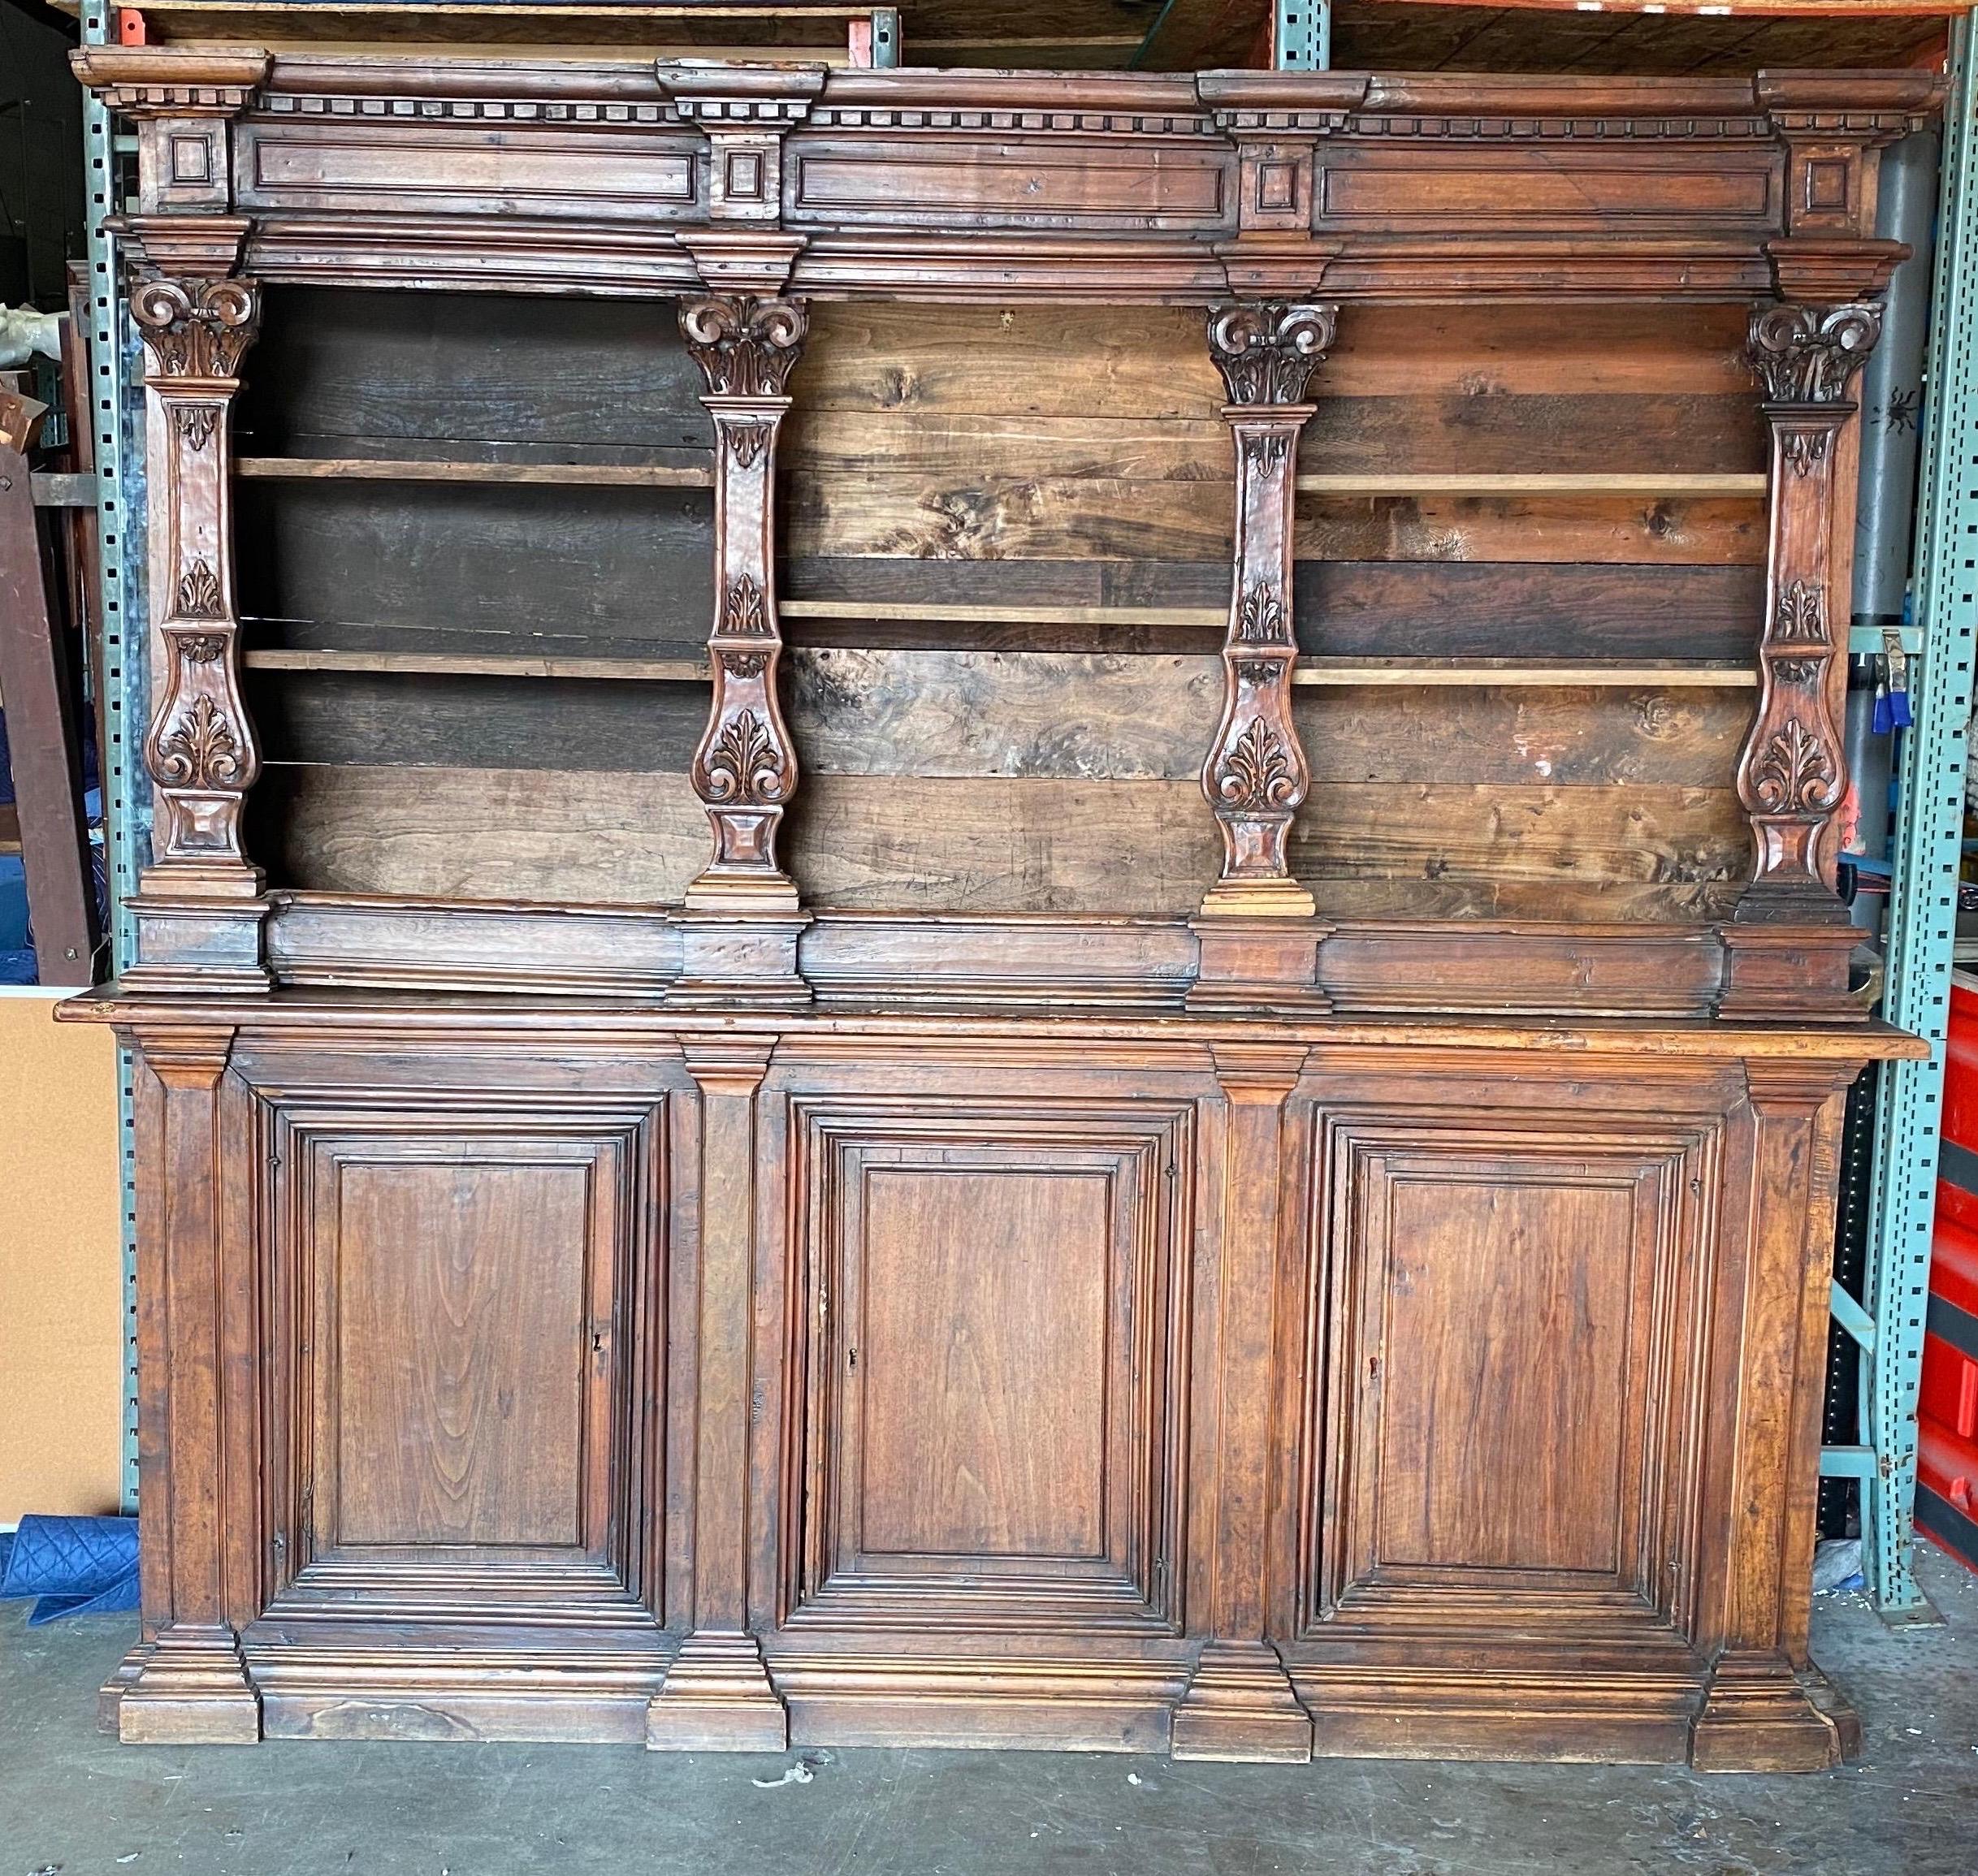 18th century Tuscan walnut bookcase. Two parts- top is has adjustable shelves and the base has three doors revealing more shelves. Hand carved throughout.